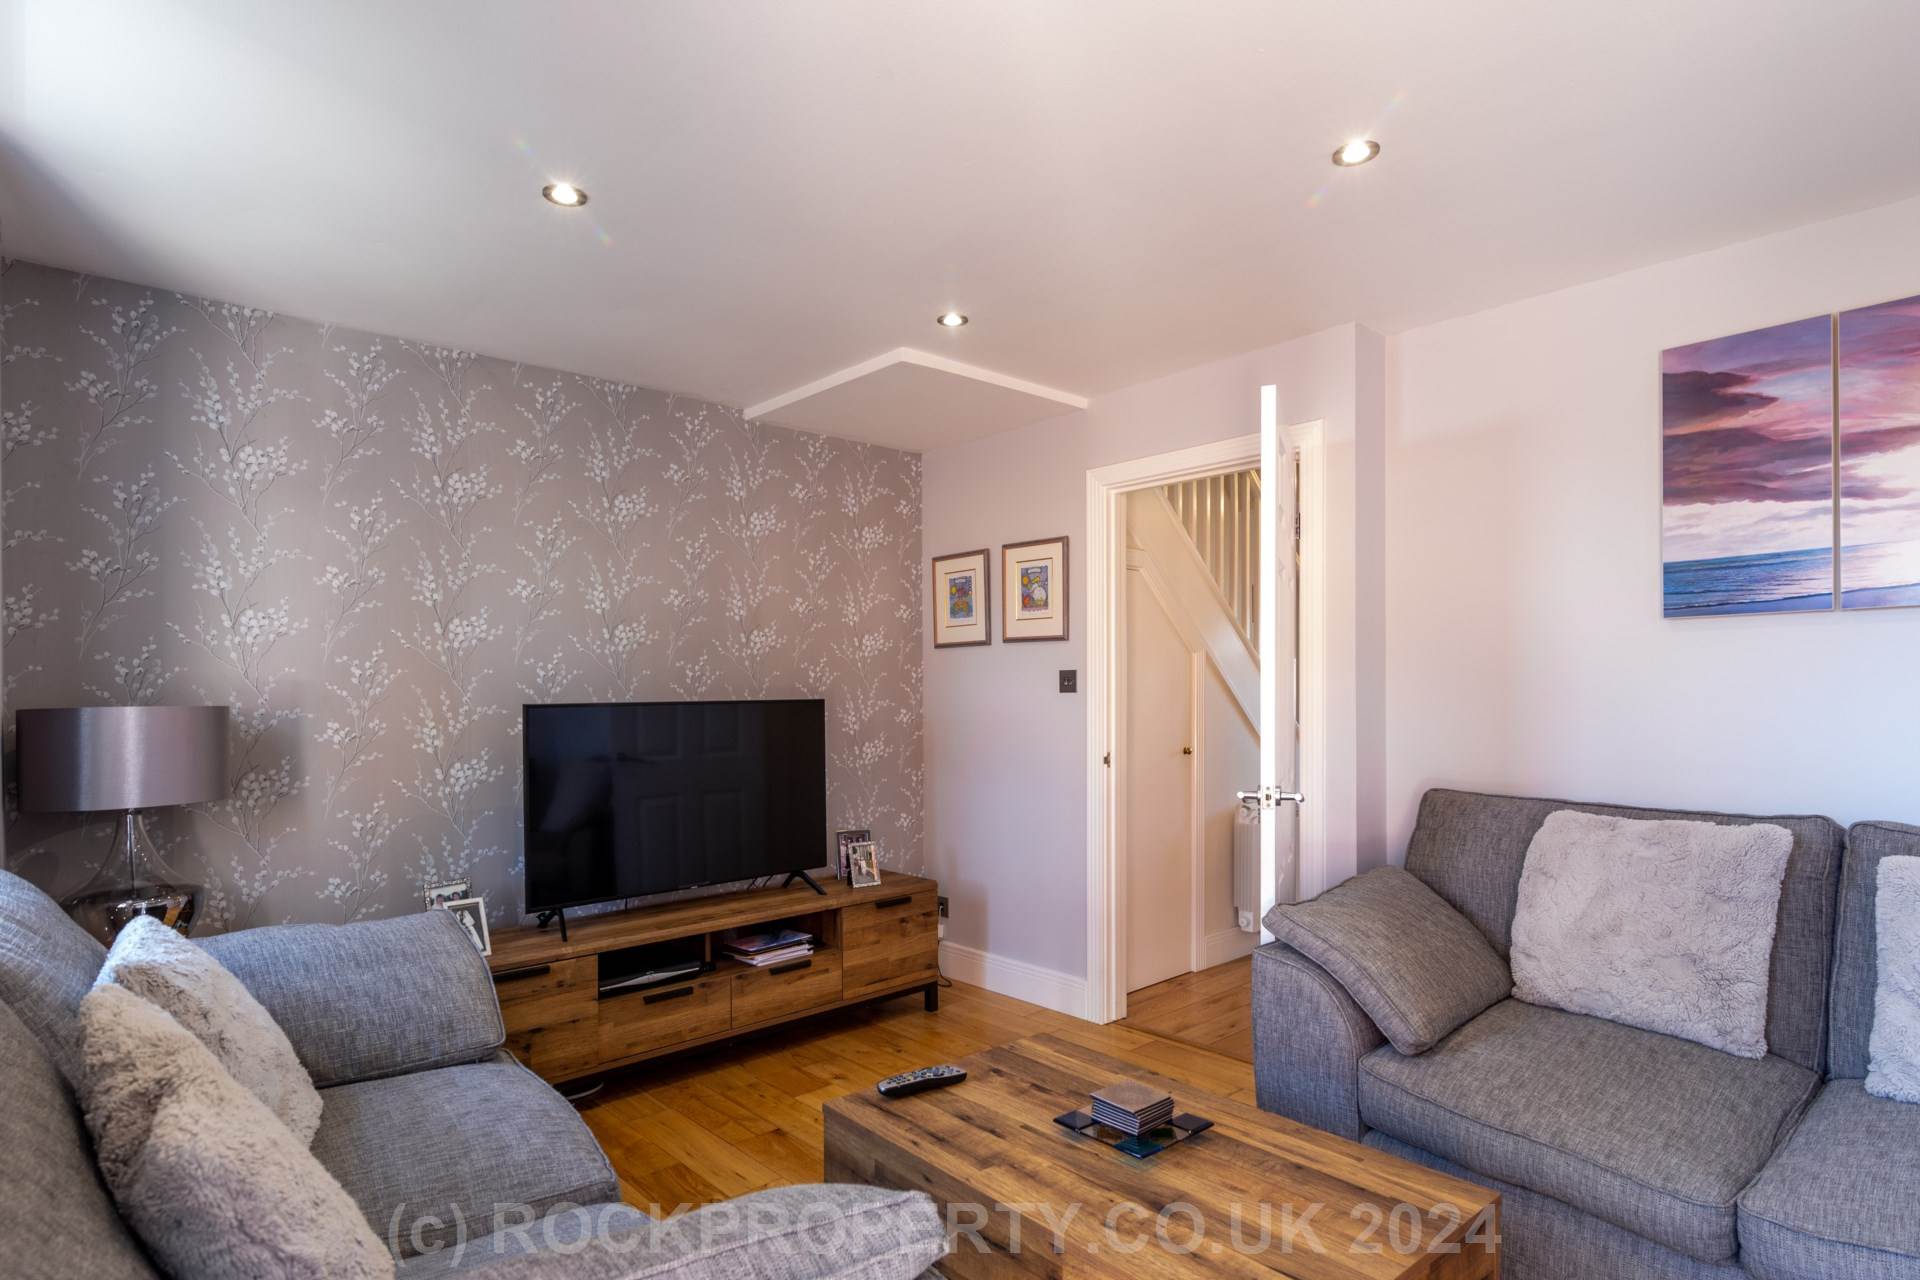 OFFERS INVITED - 2 BED HOUSE, Dunedin Farm, Outskirts of St Helier, Image 6